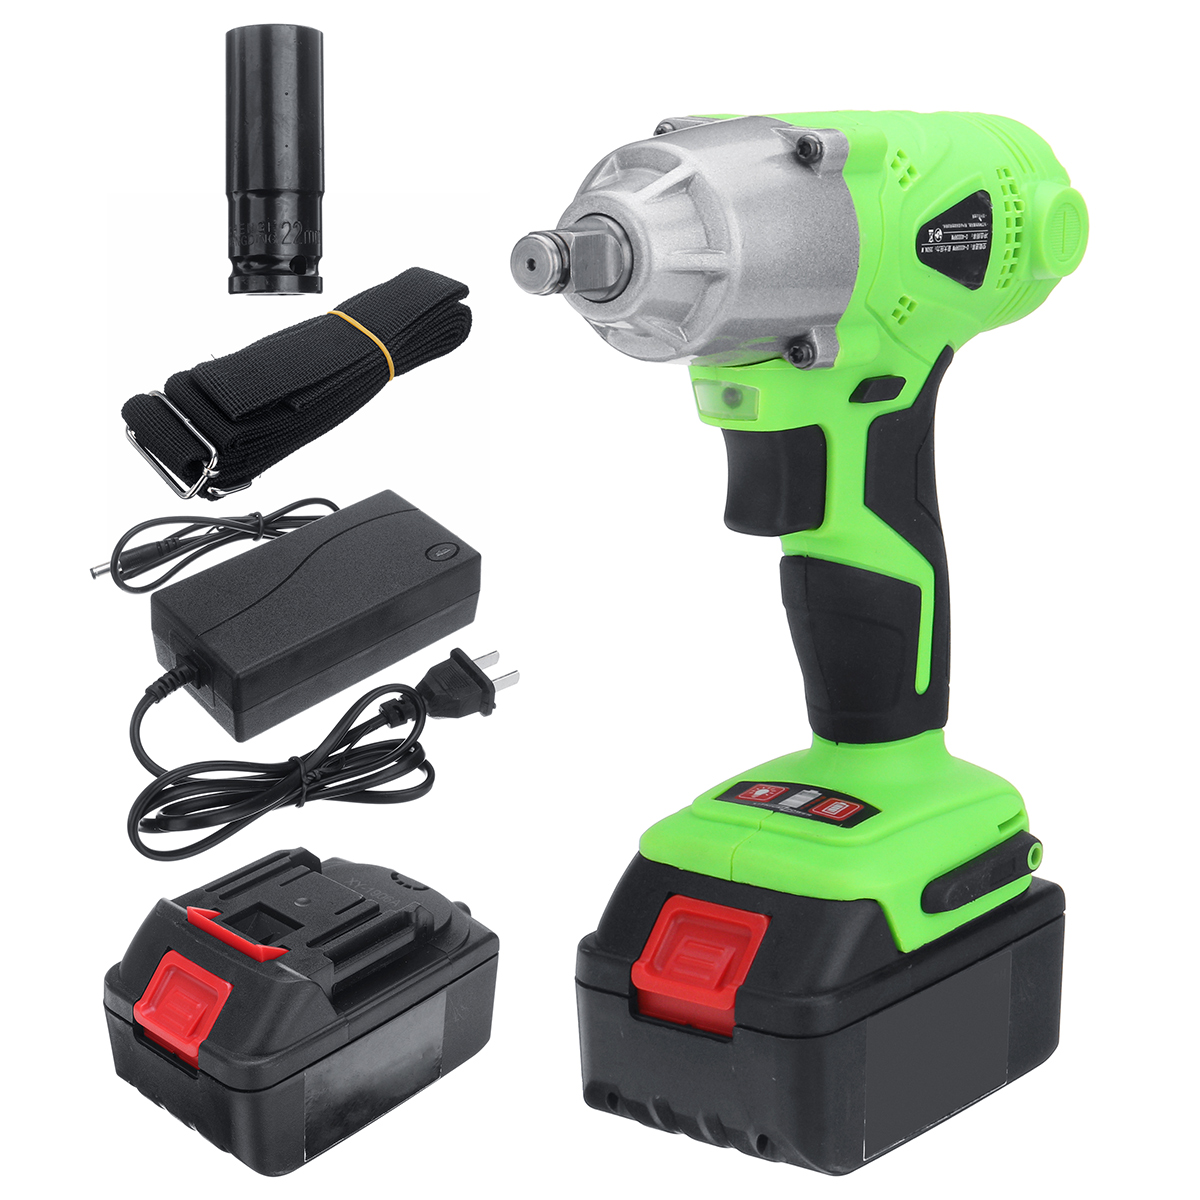 

168VF 19800mAh 350NM Cordless Electric Car Brushless Torque Impact Wrench Drill